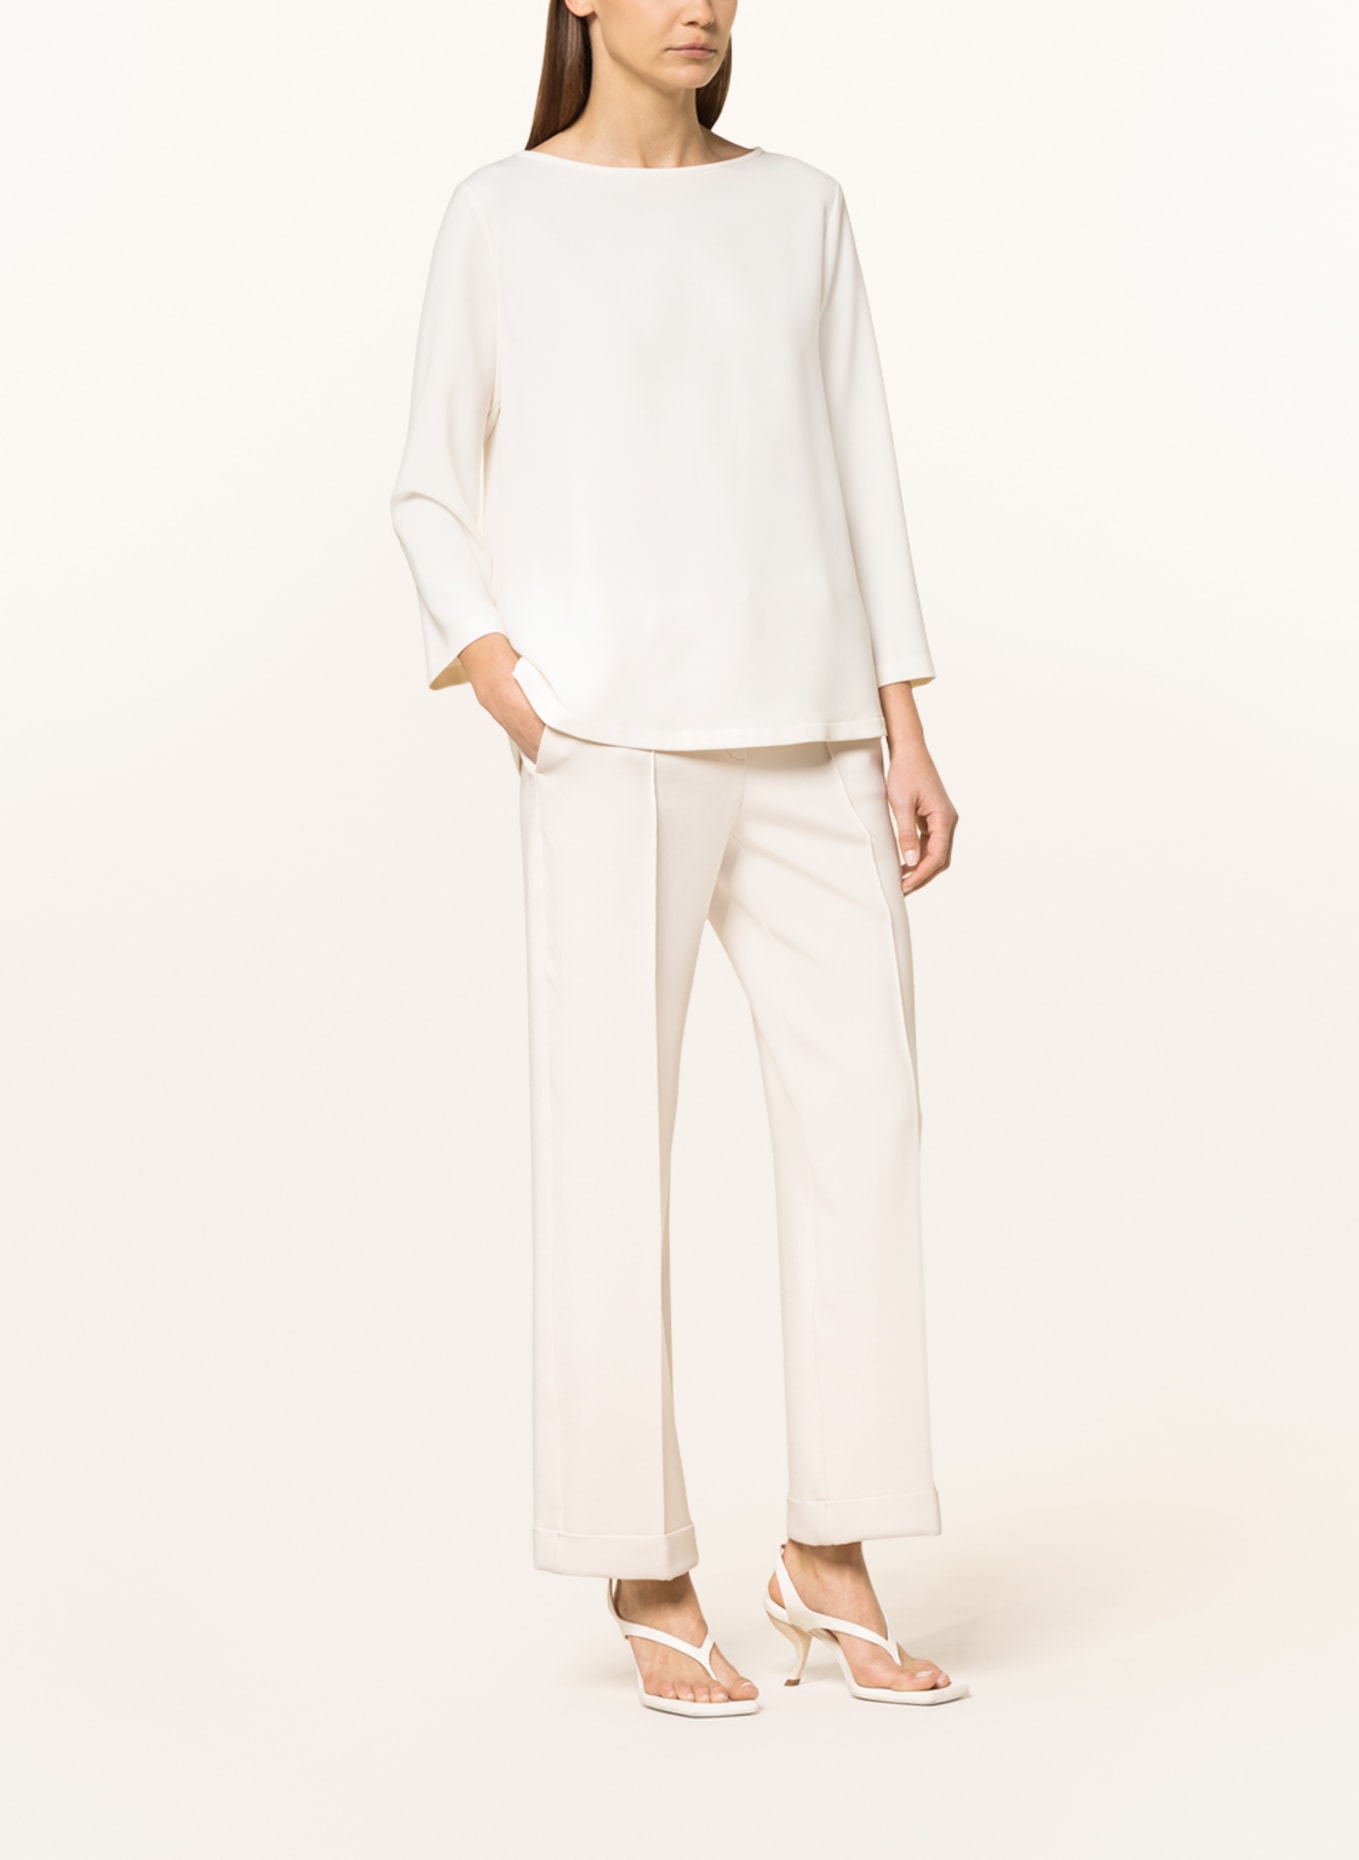 ANTONELLI firenze Shirt blouse with 3/4 sleeves, Color: WHITE (Image 2)